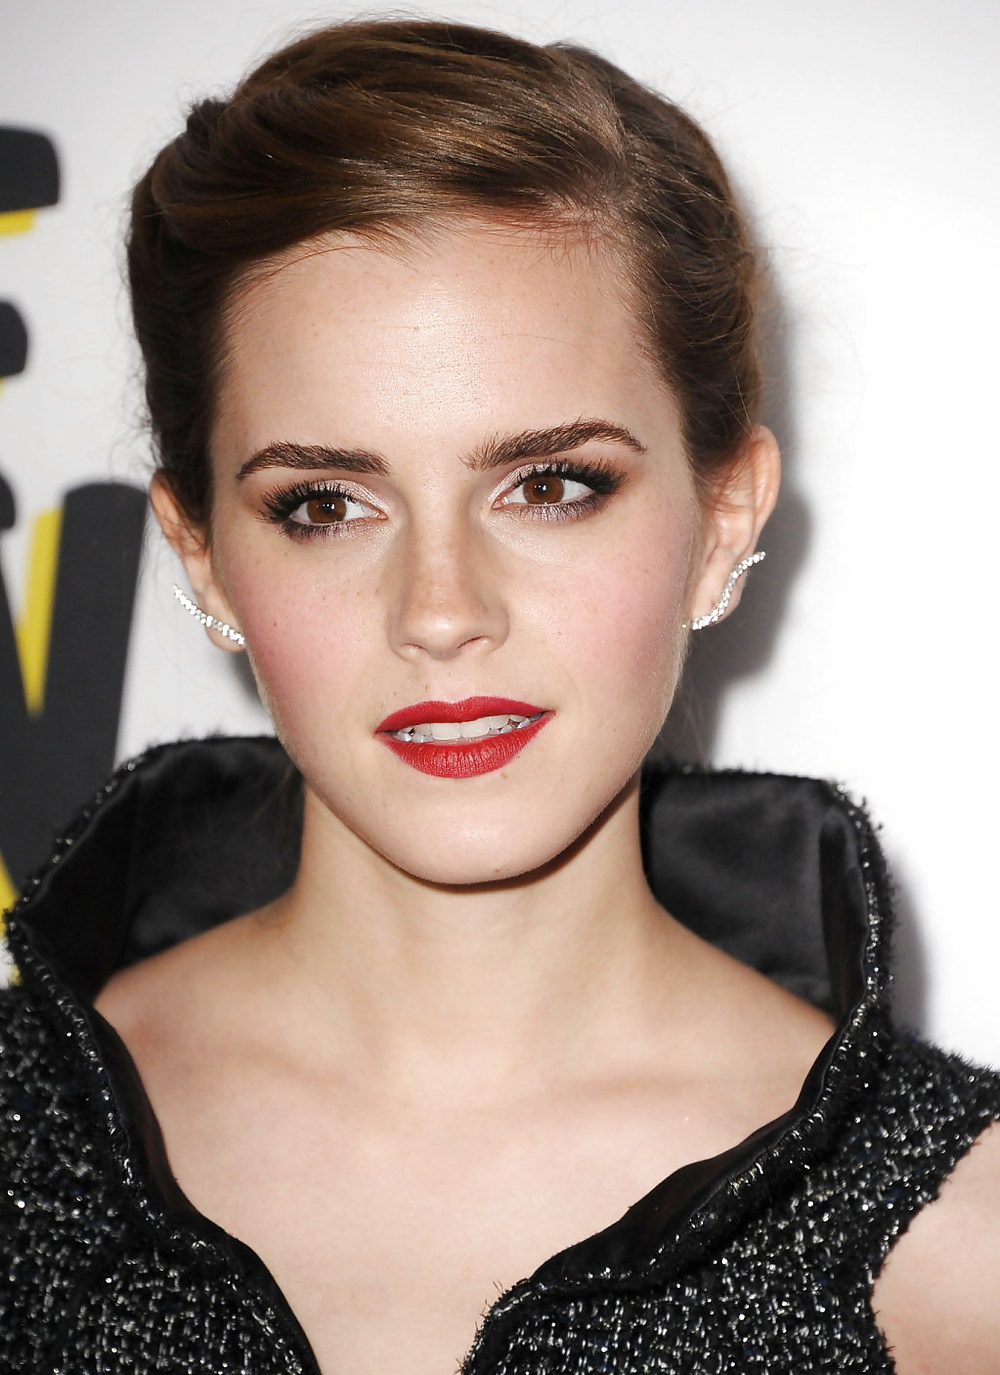 Most beautiful emma watson pic and face ever!